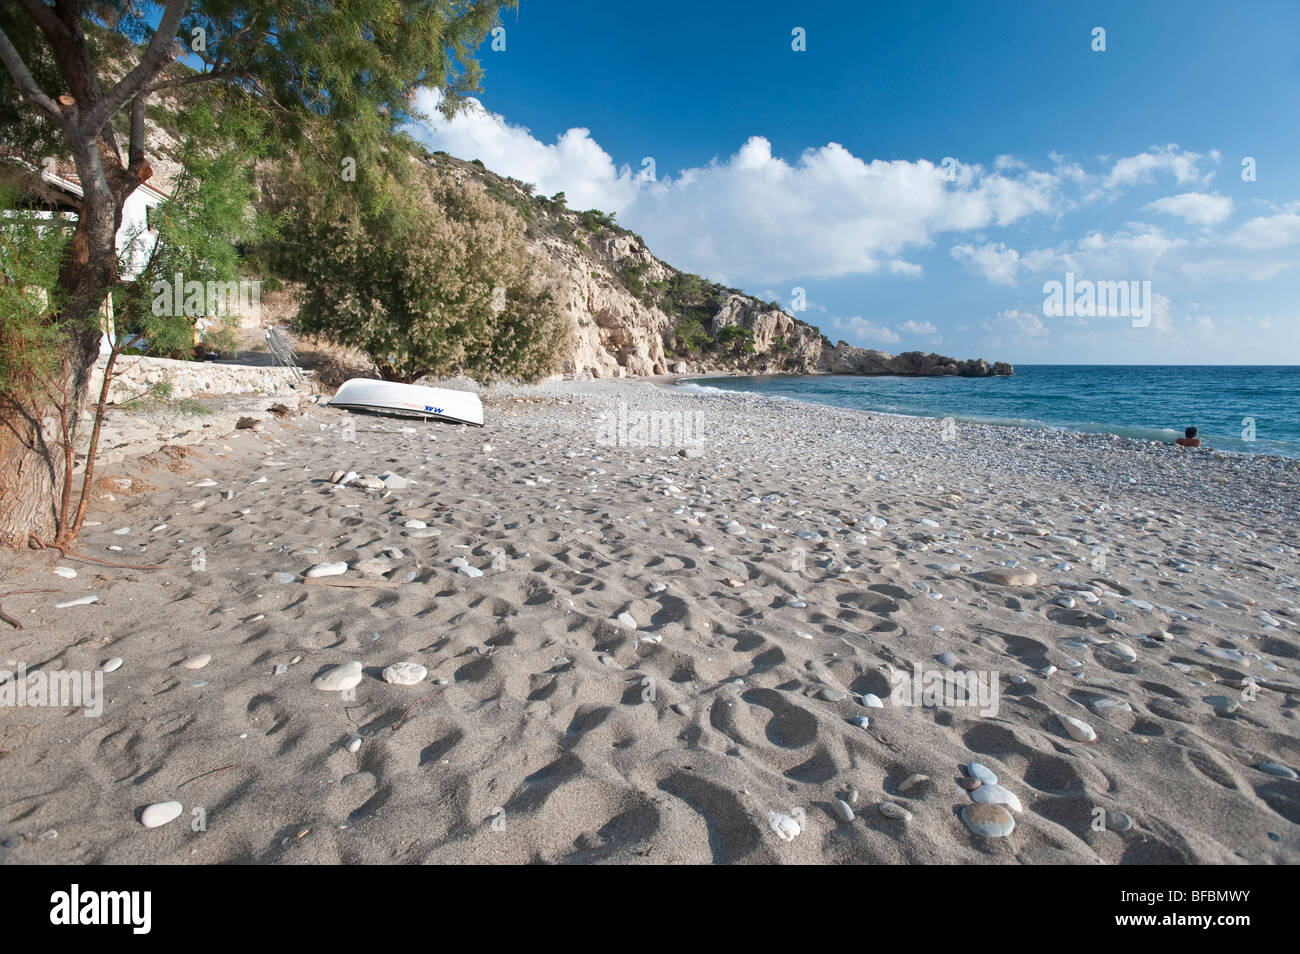 white clouds in the blue aegean sky over a sandy beach on a greek island Stock Photo